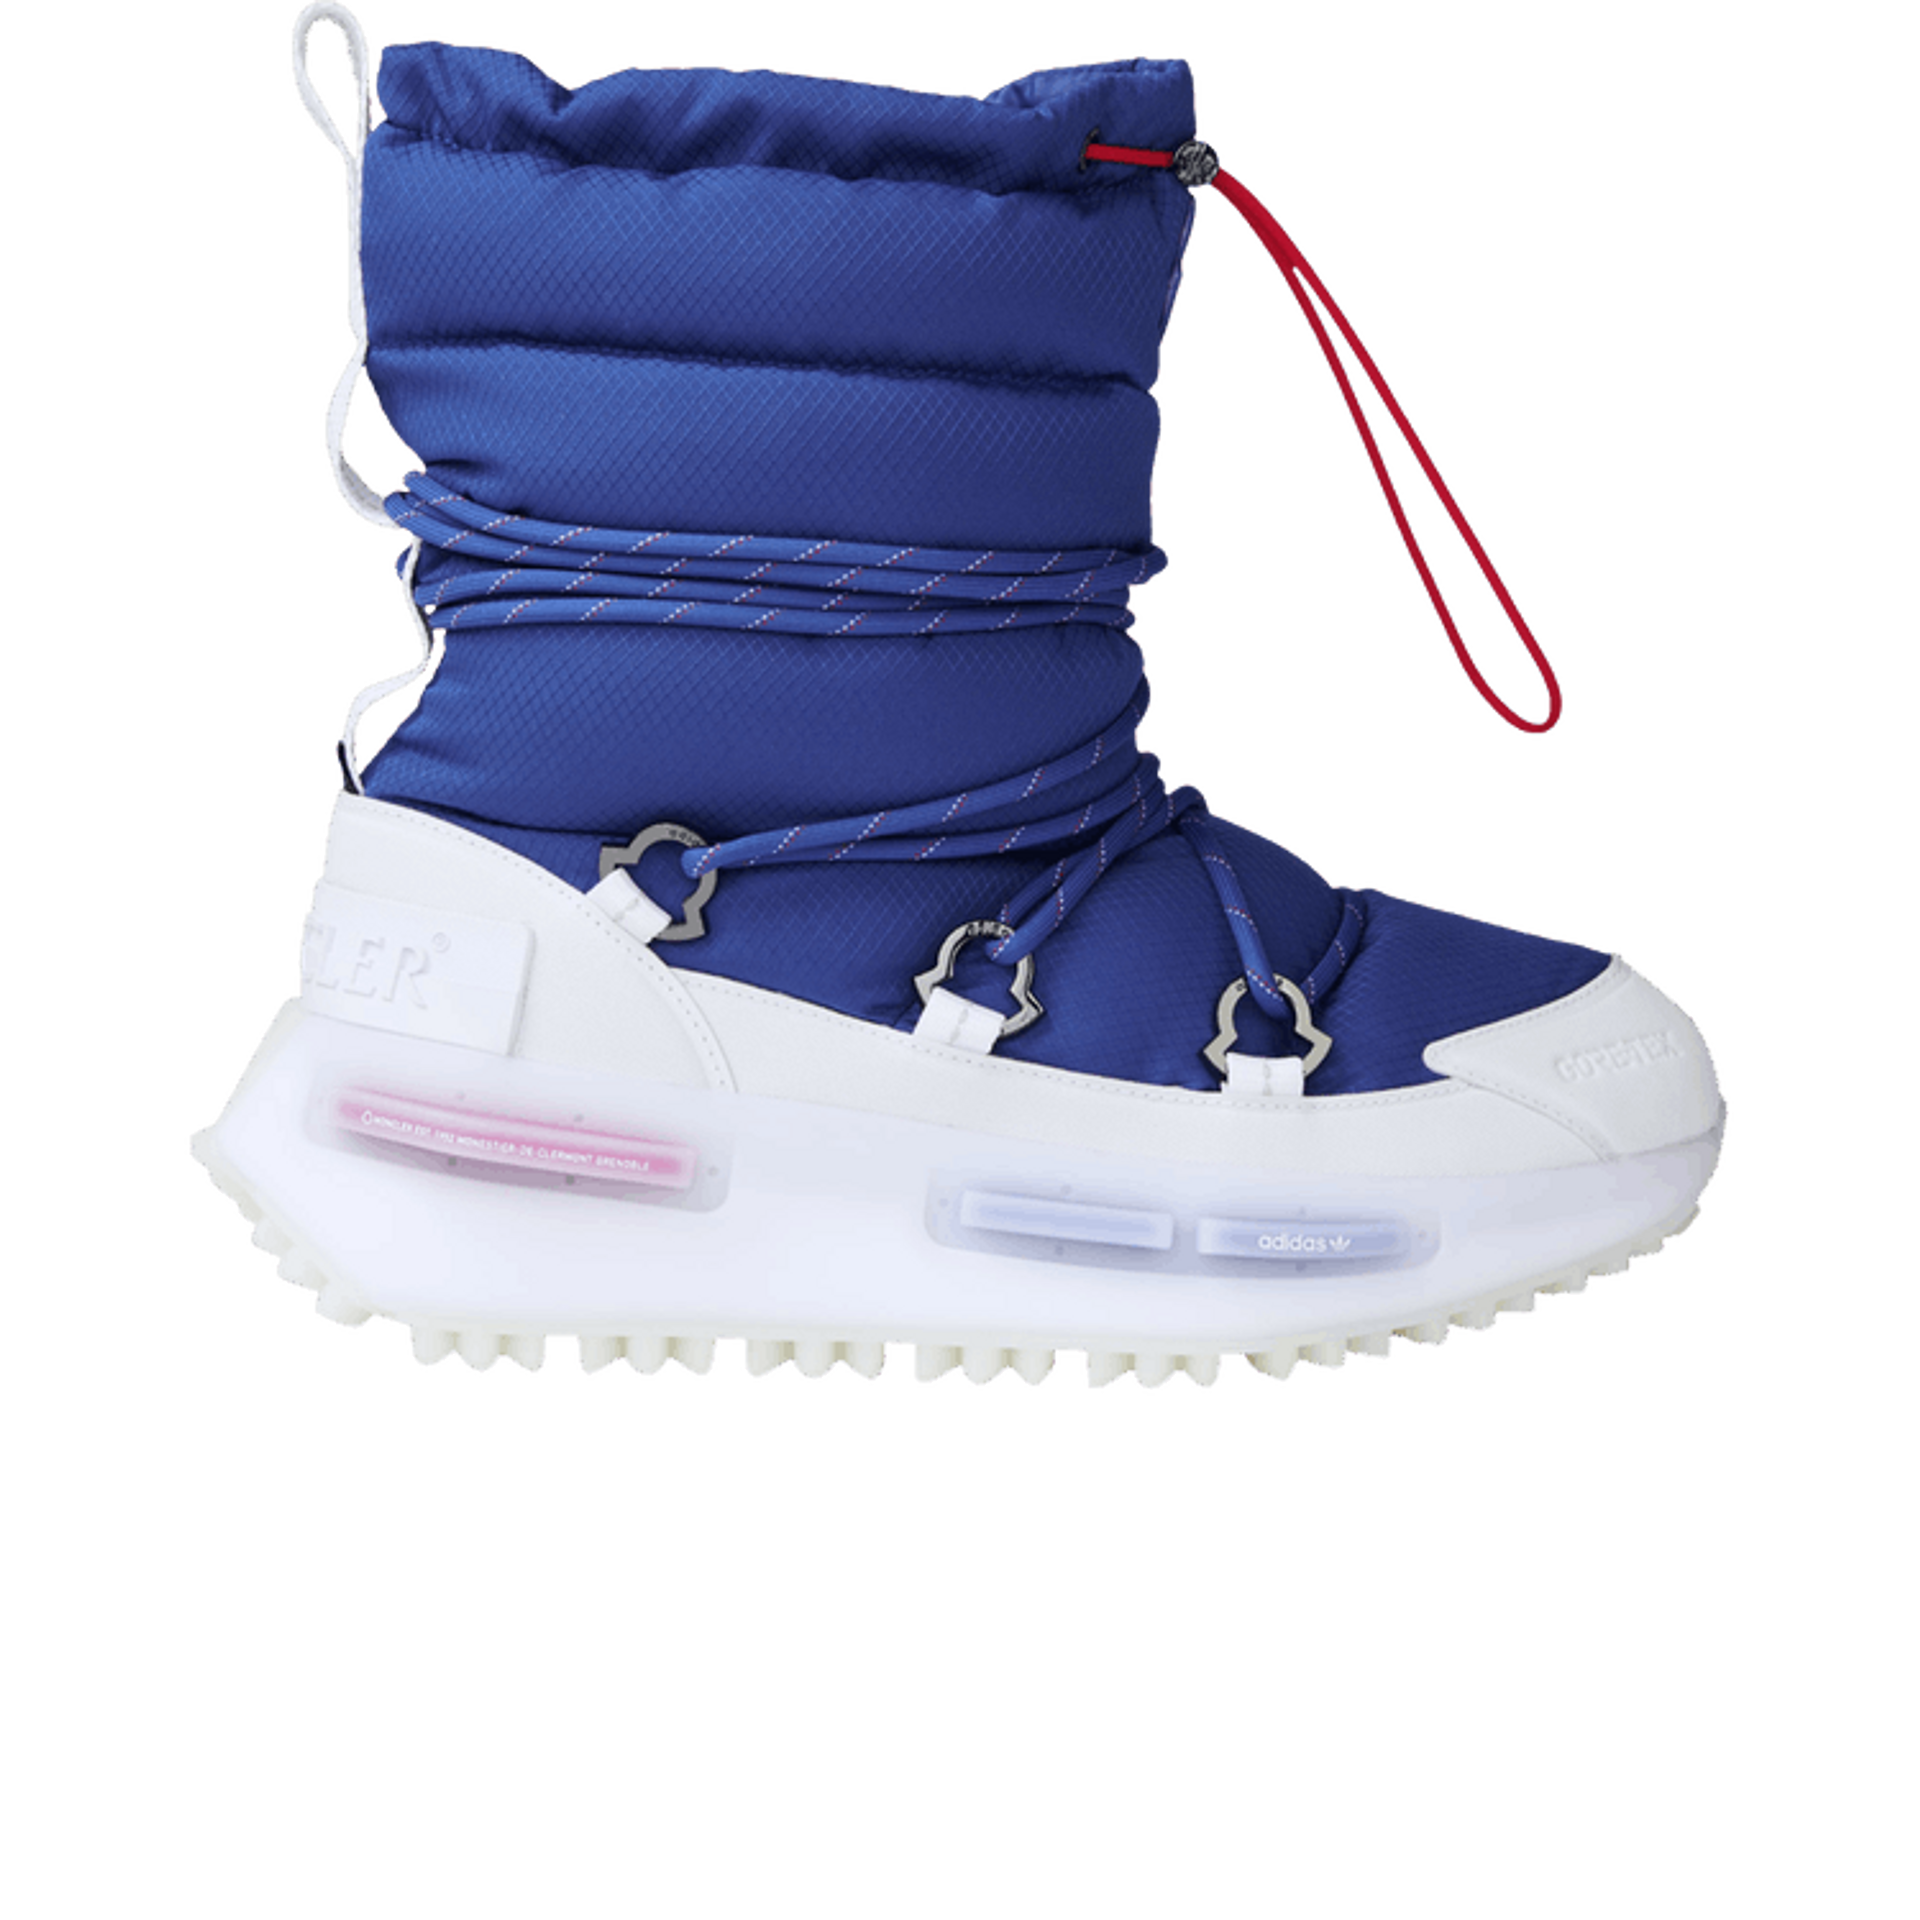 Moncler x adidas NMD_S1 Mid GORE-TEX 'The Art of Exploration - Royal Blue'